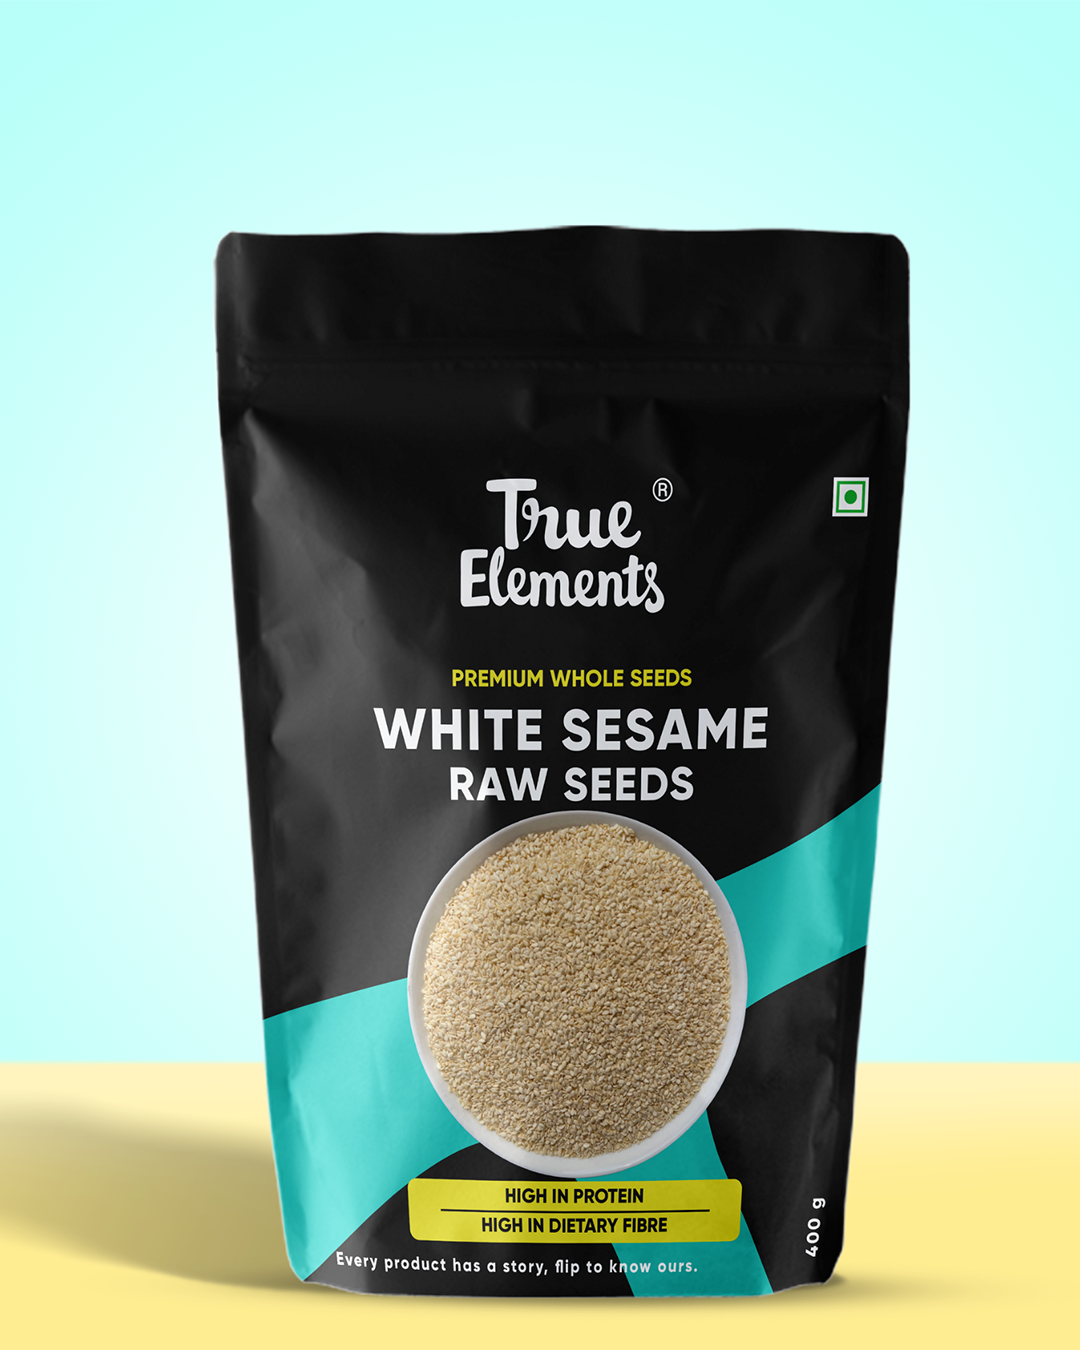 Raw White Sesame Seeds 400g - Rich in Vitamins Contains 22.9g Protein